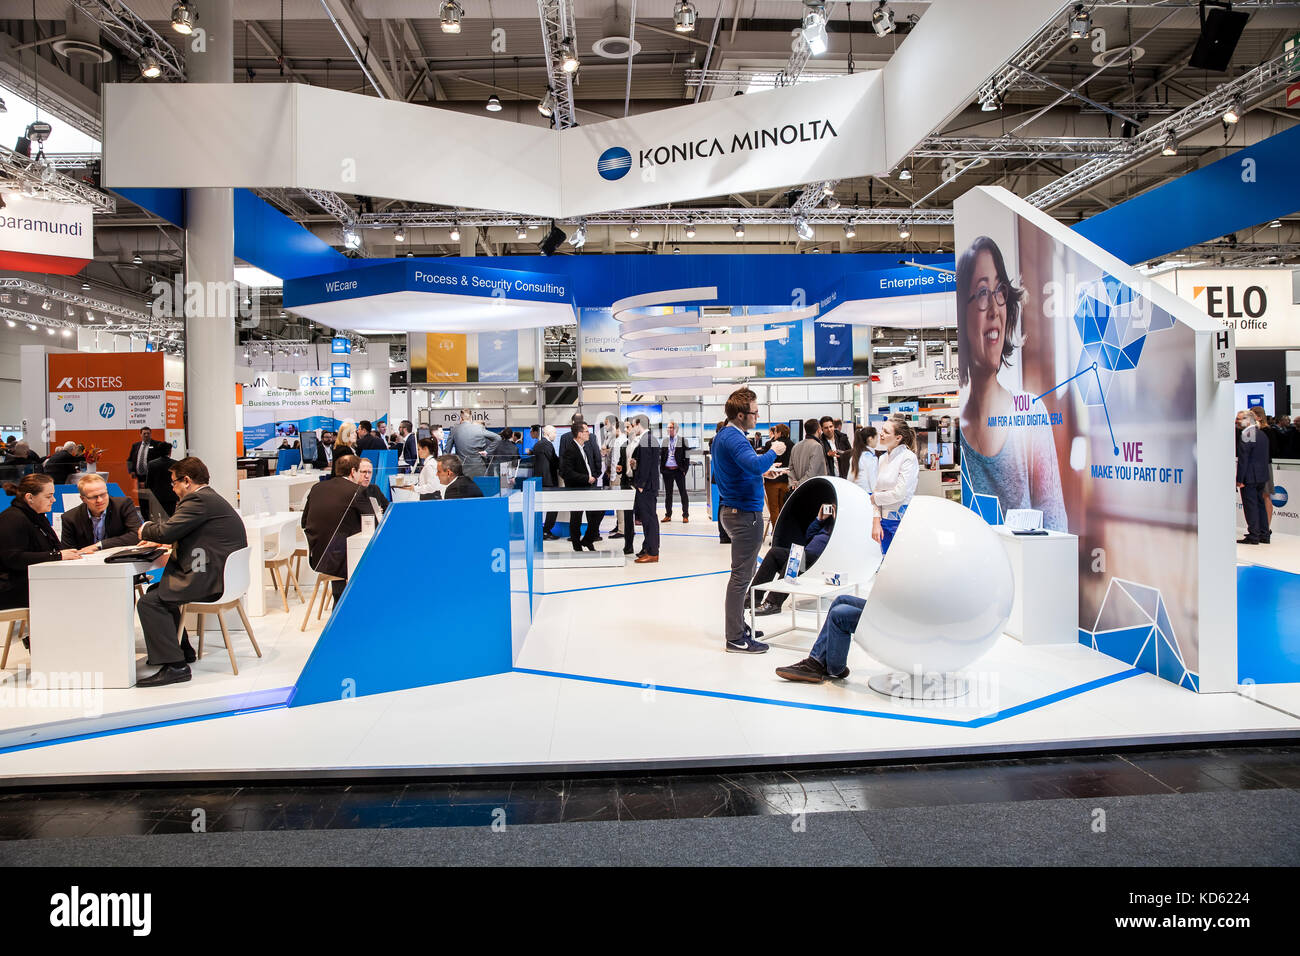 Konica Minolta company stand on exhibition fair Cebit 2017 in Hannover Messe, Germany Stock Photo